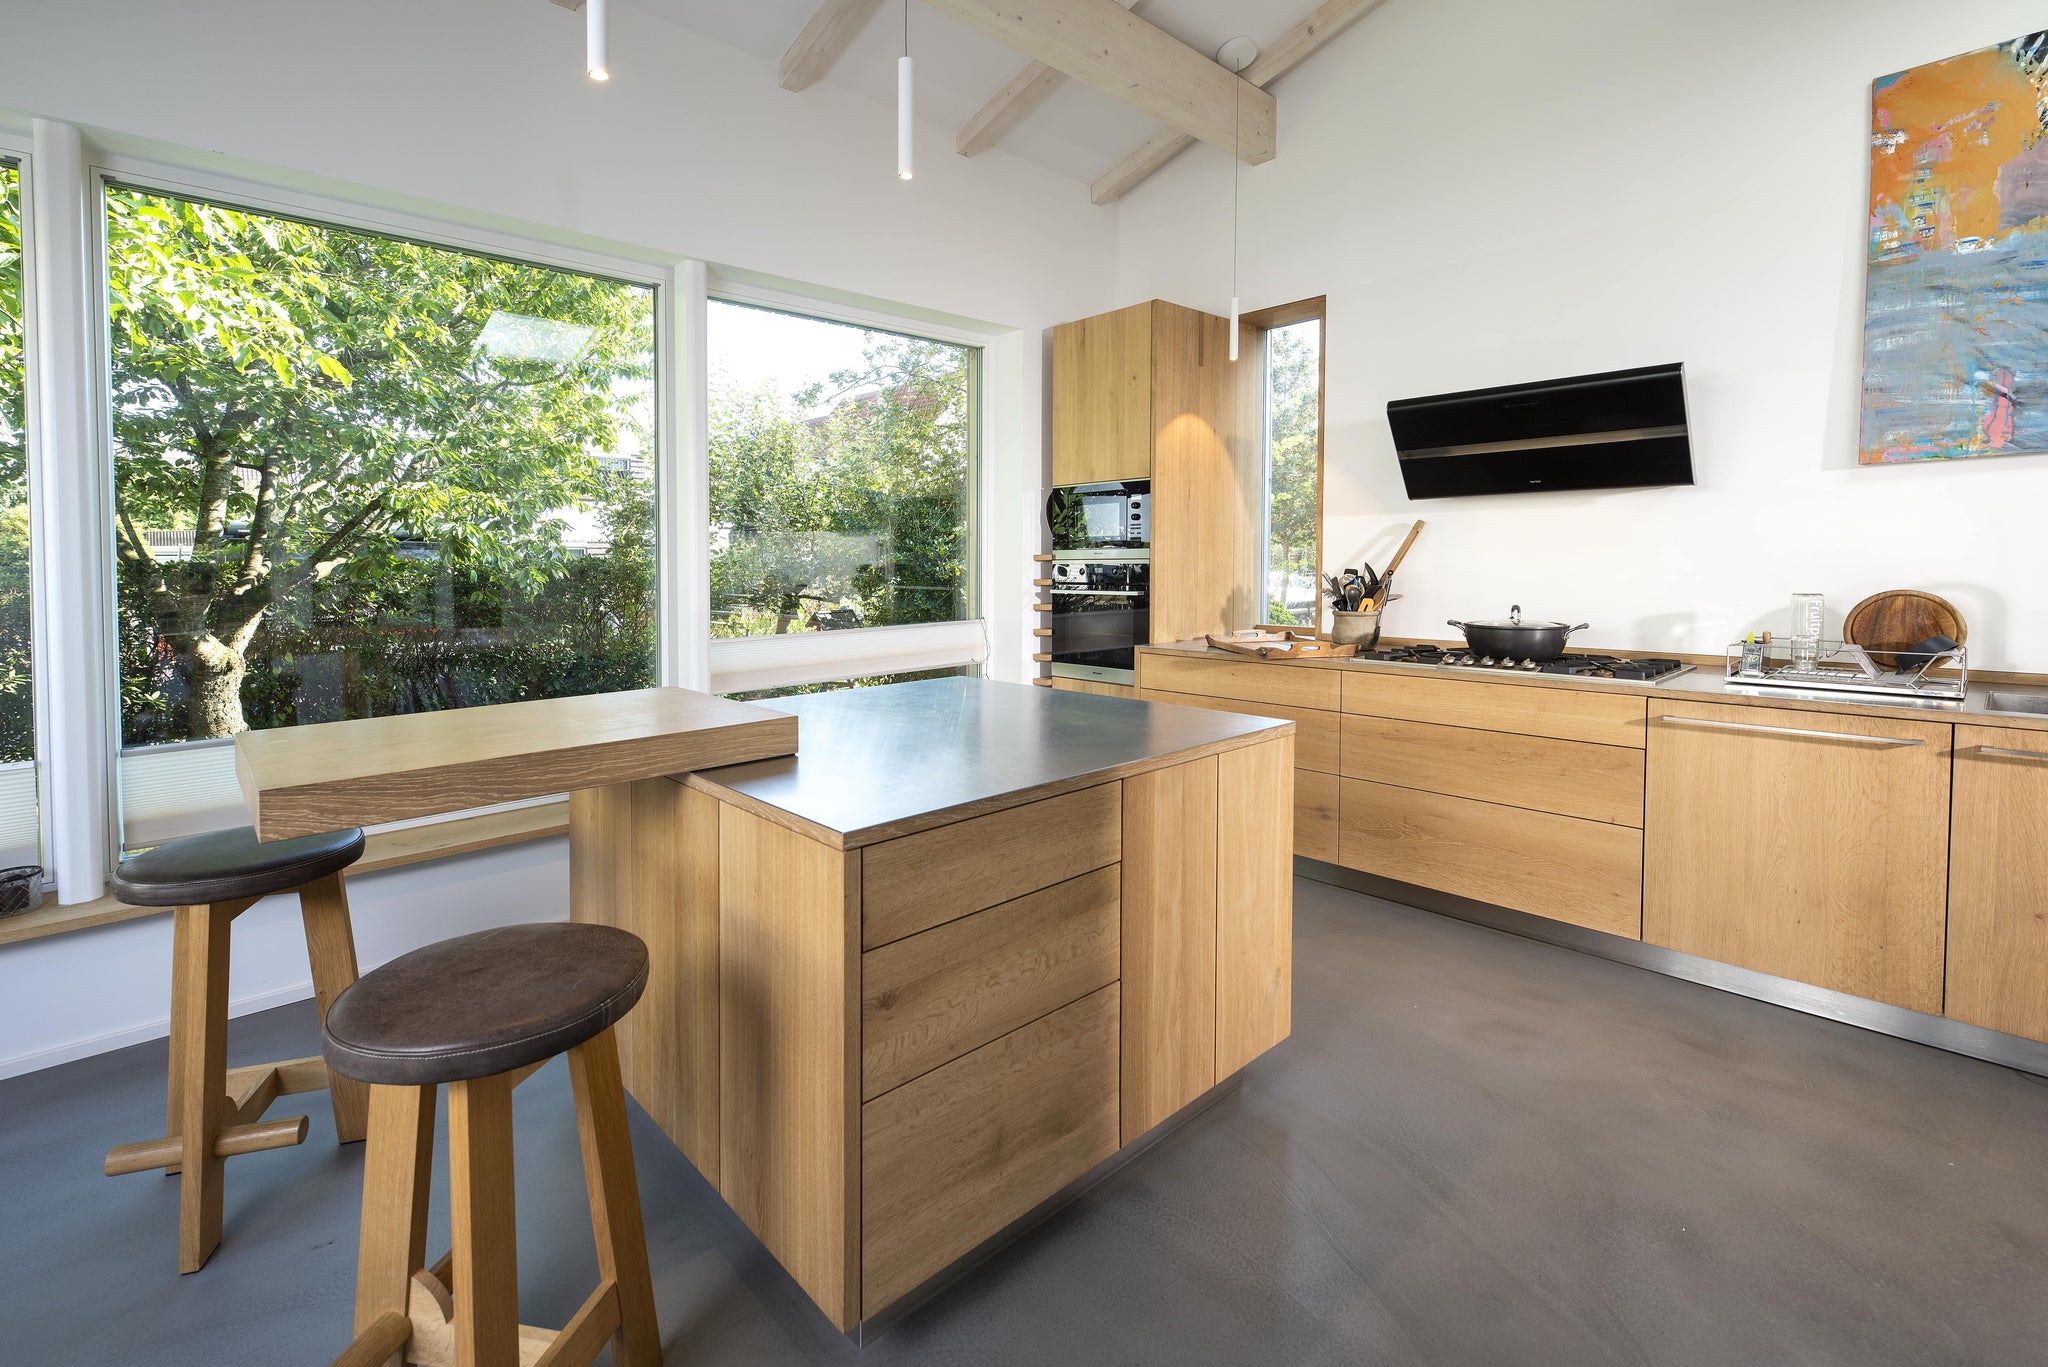 Our kitchen 143 combines matt stainless steel with light oak and thus adapts perfectly to the living environment.